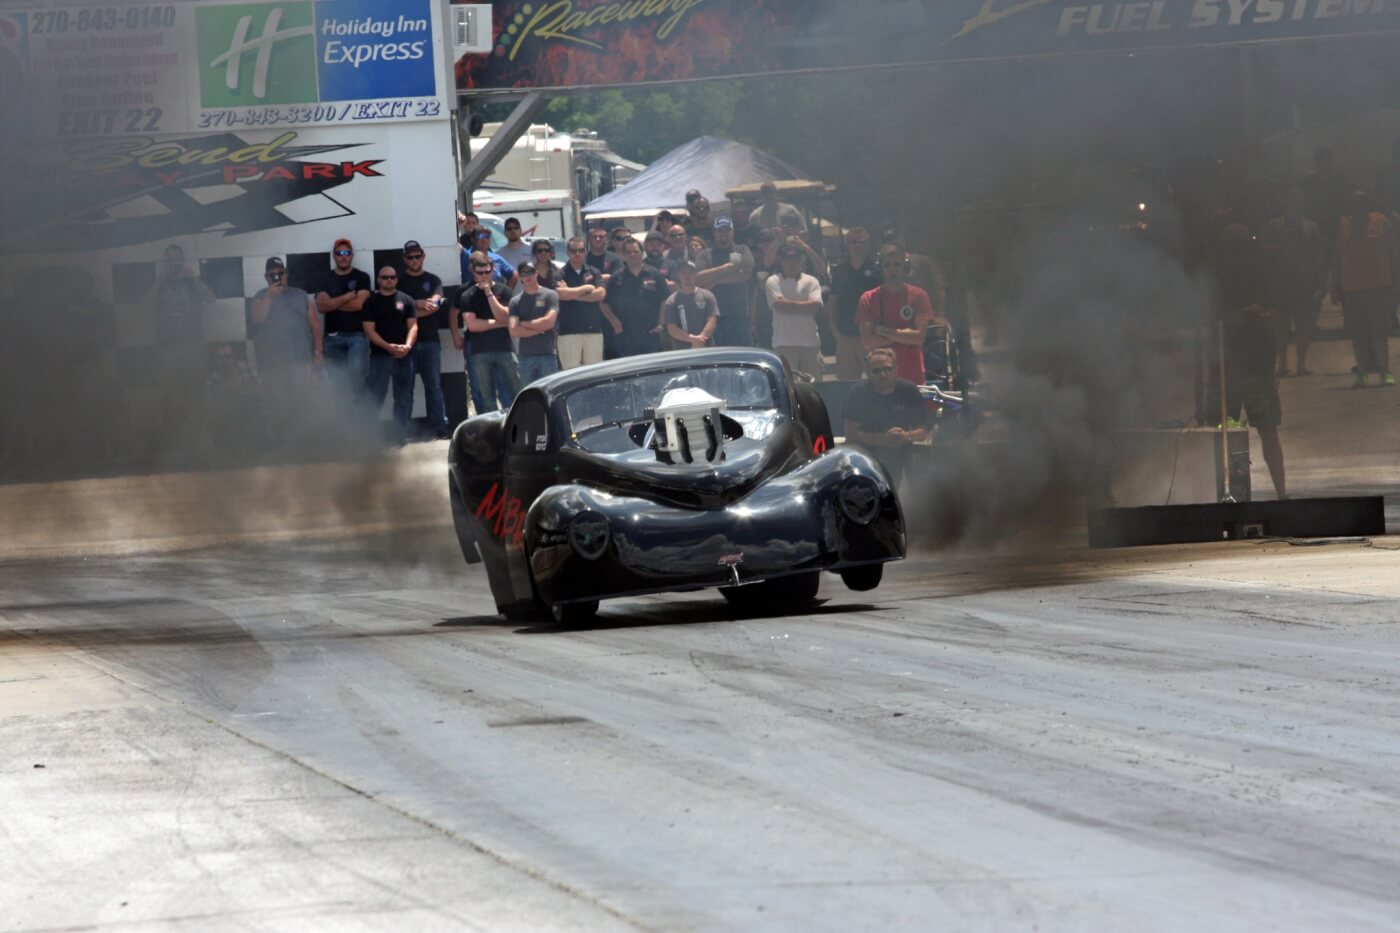 Ryan Milliken was behind the wheel of the MBRP “Batmobile” Willys, taking the Pro Dragster Class win over Jared Jones who had problems in the final round.